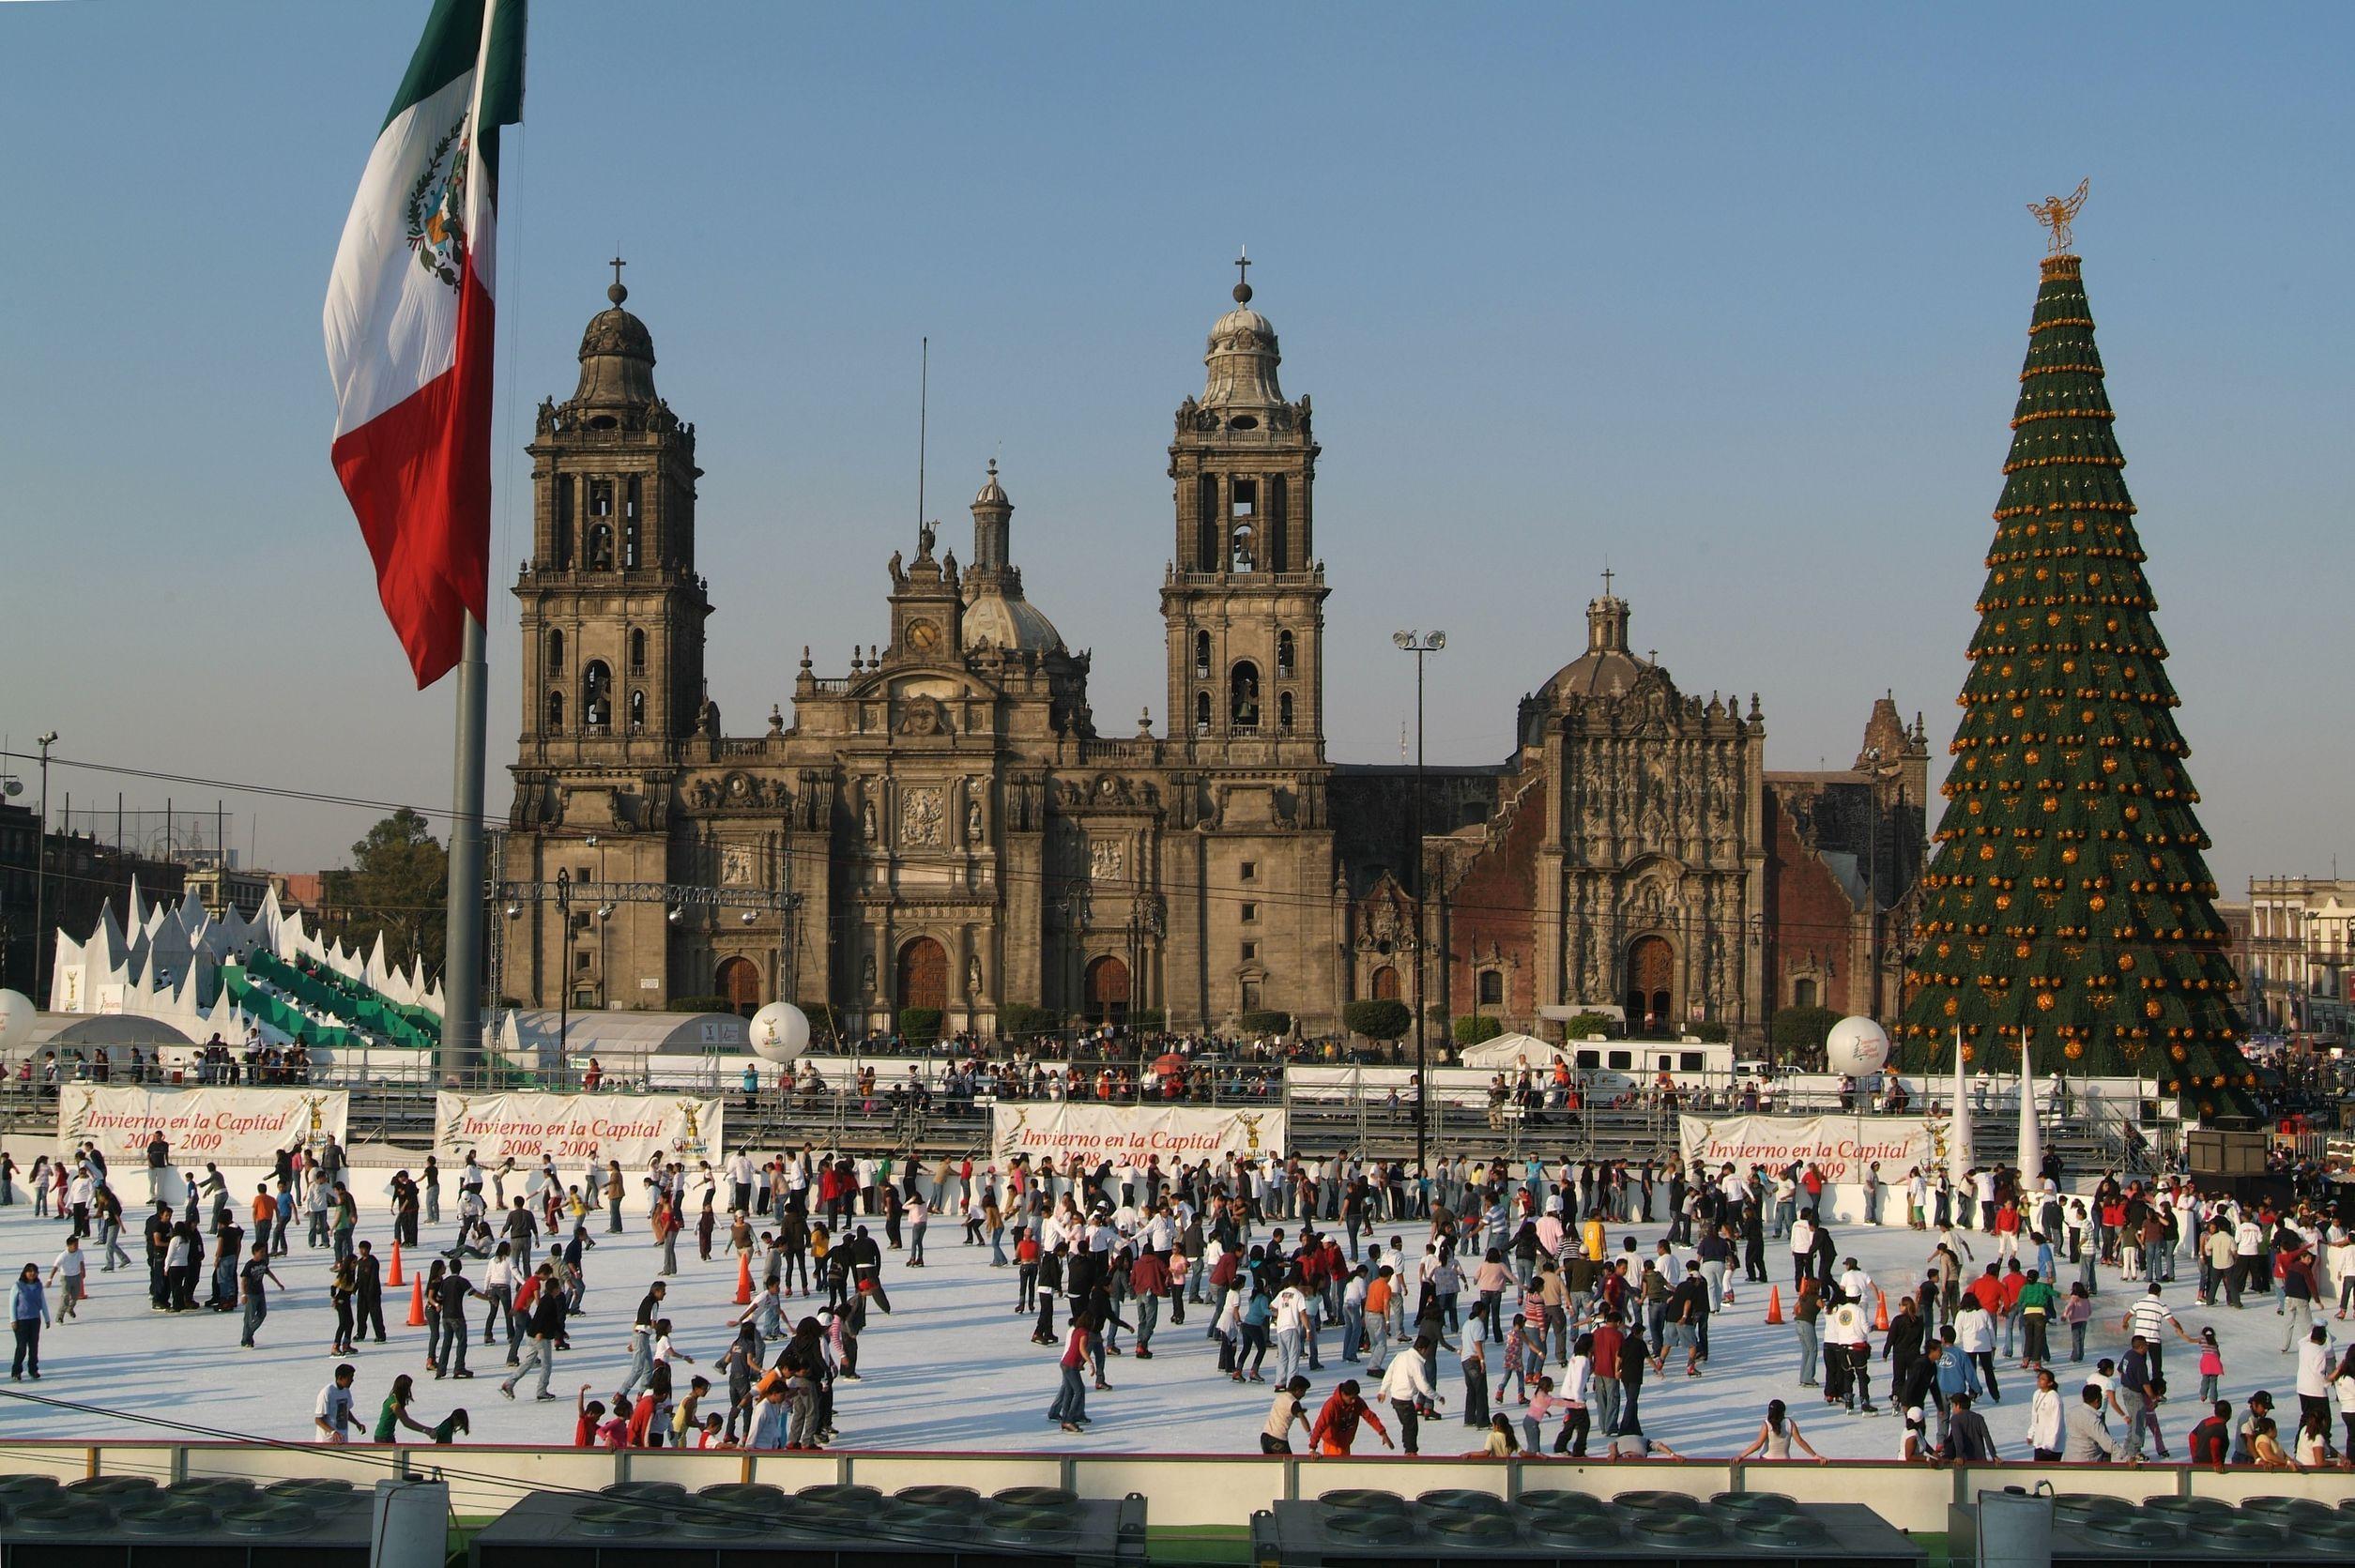 Quality Mexico City Wallpaper, Cities